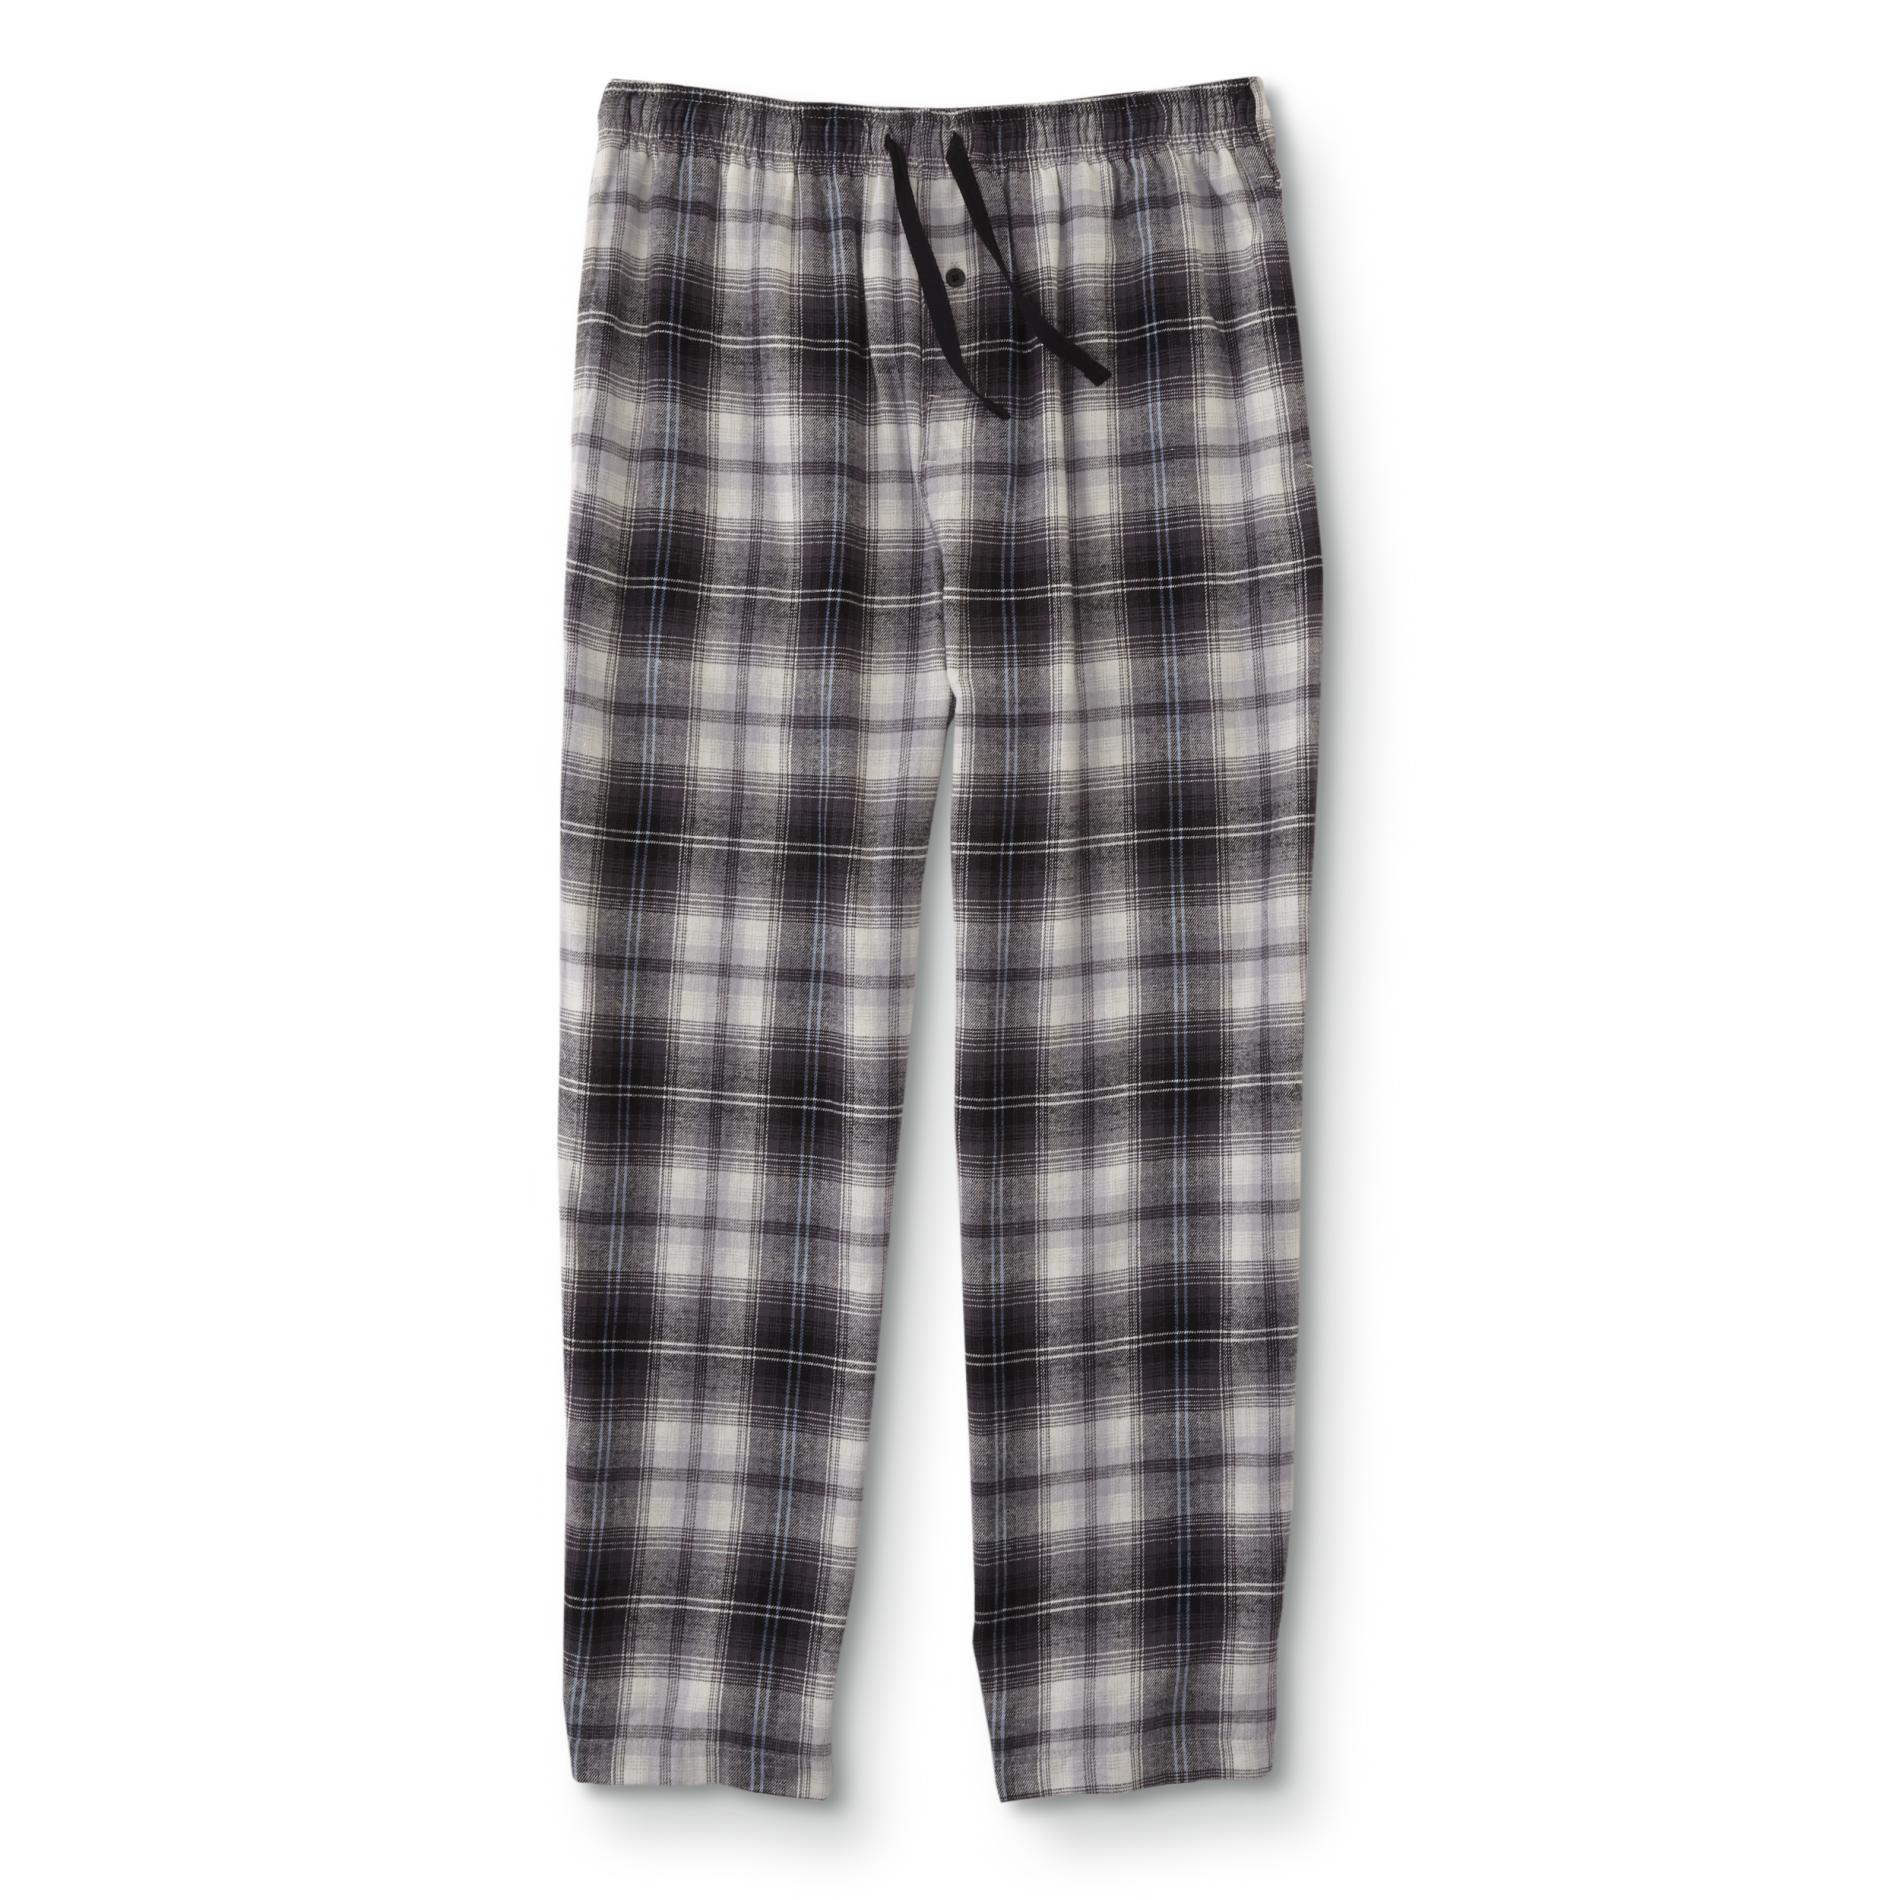 black and red flannel pants